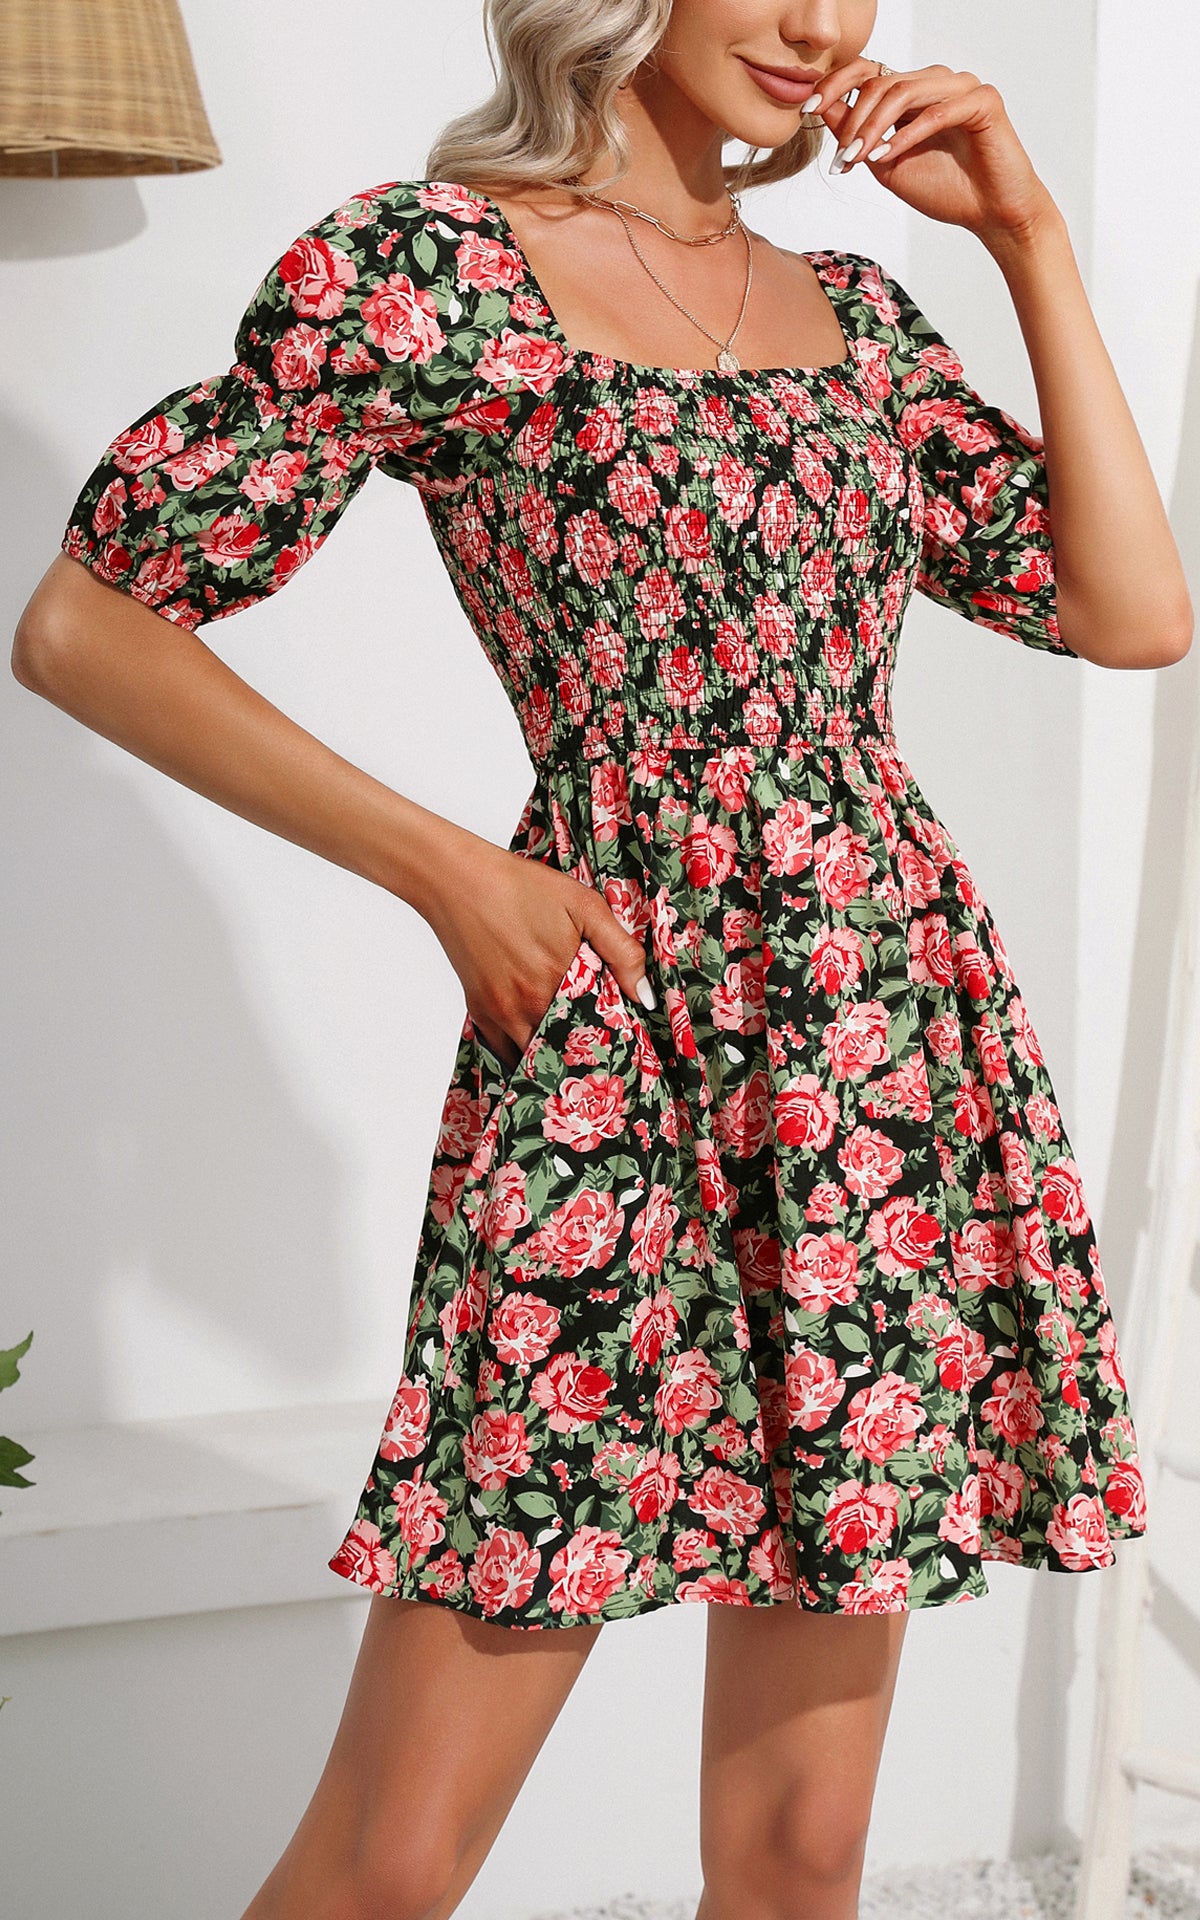 Summer Floral Mini Dress - Square Neck Short Puff Sleeve